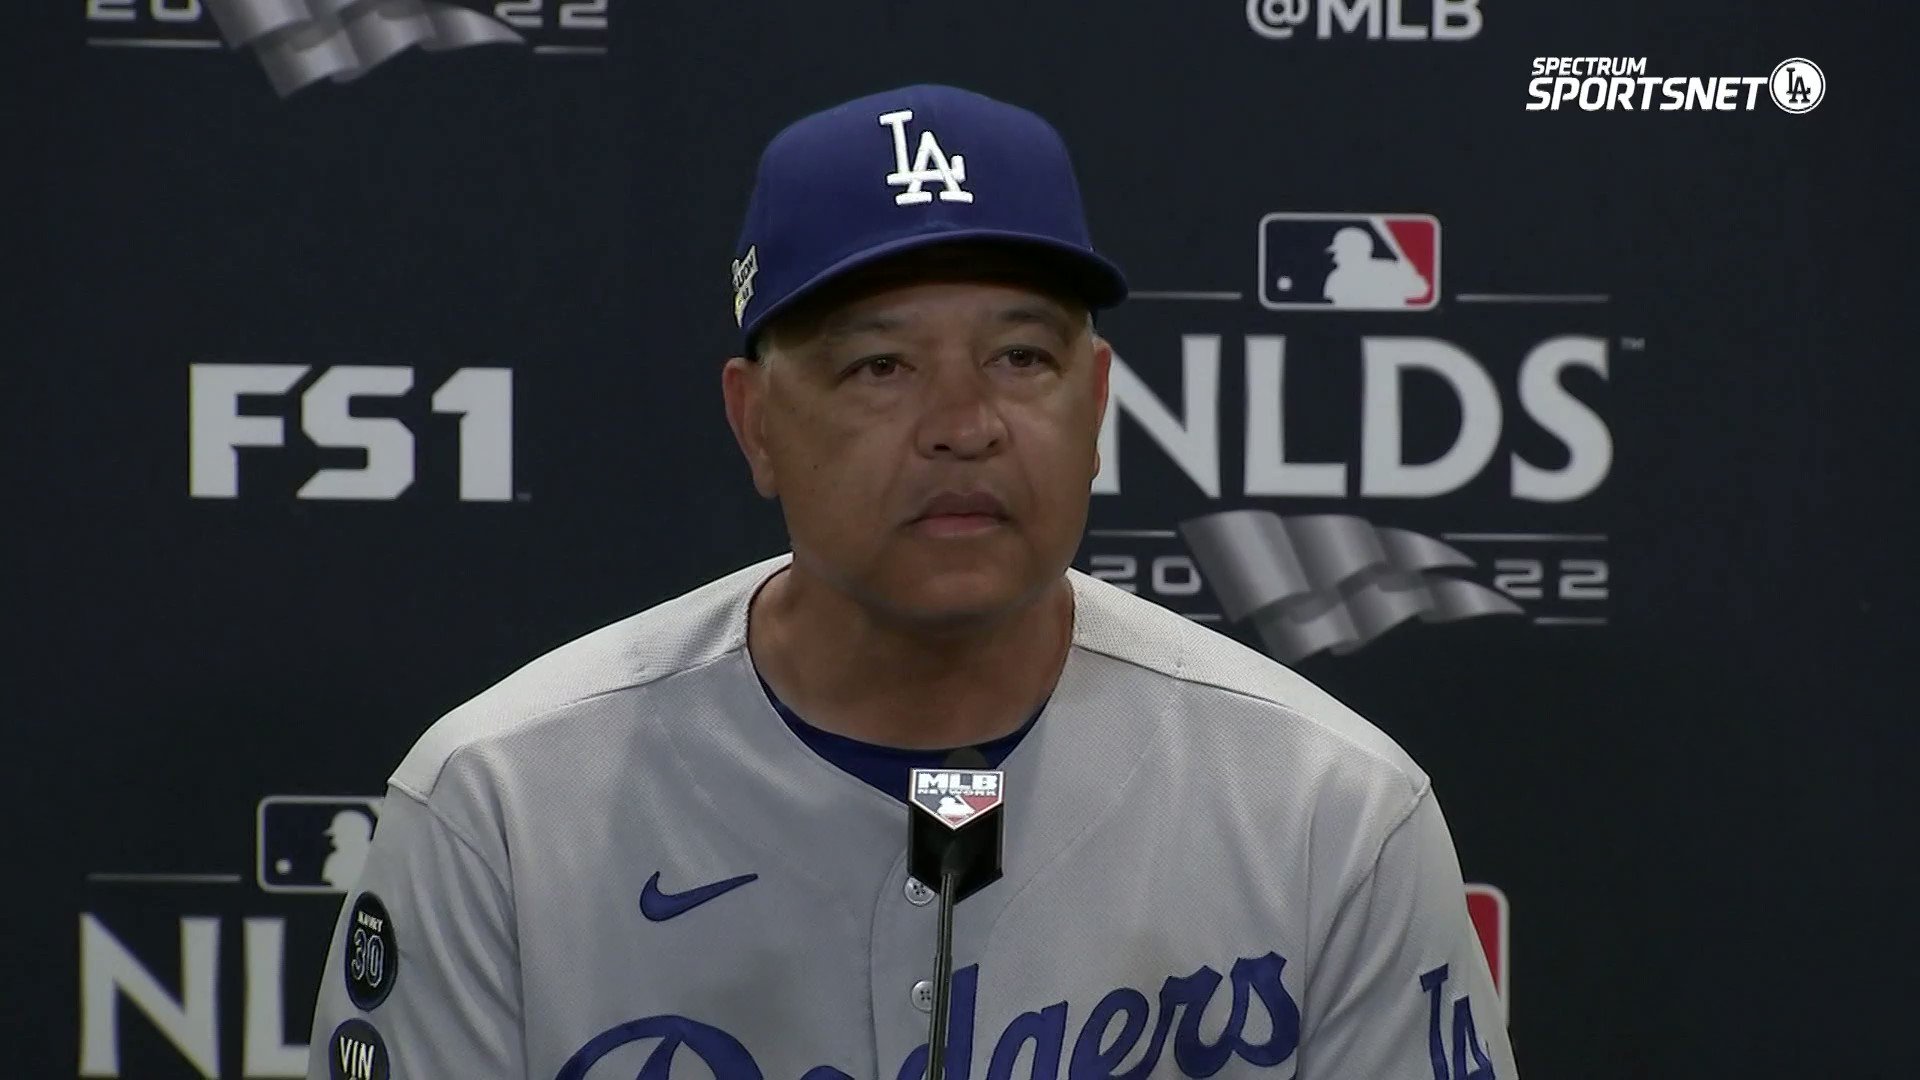 SportsNet LA on X: Dave Roberts speaks with the media after the #Dodgers  2-1 loss to the Padres in Game 3 of the #NDLS.  / X